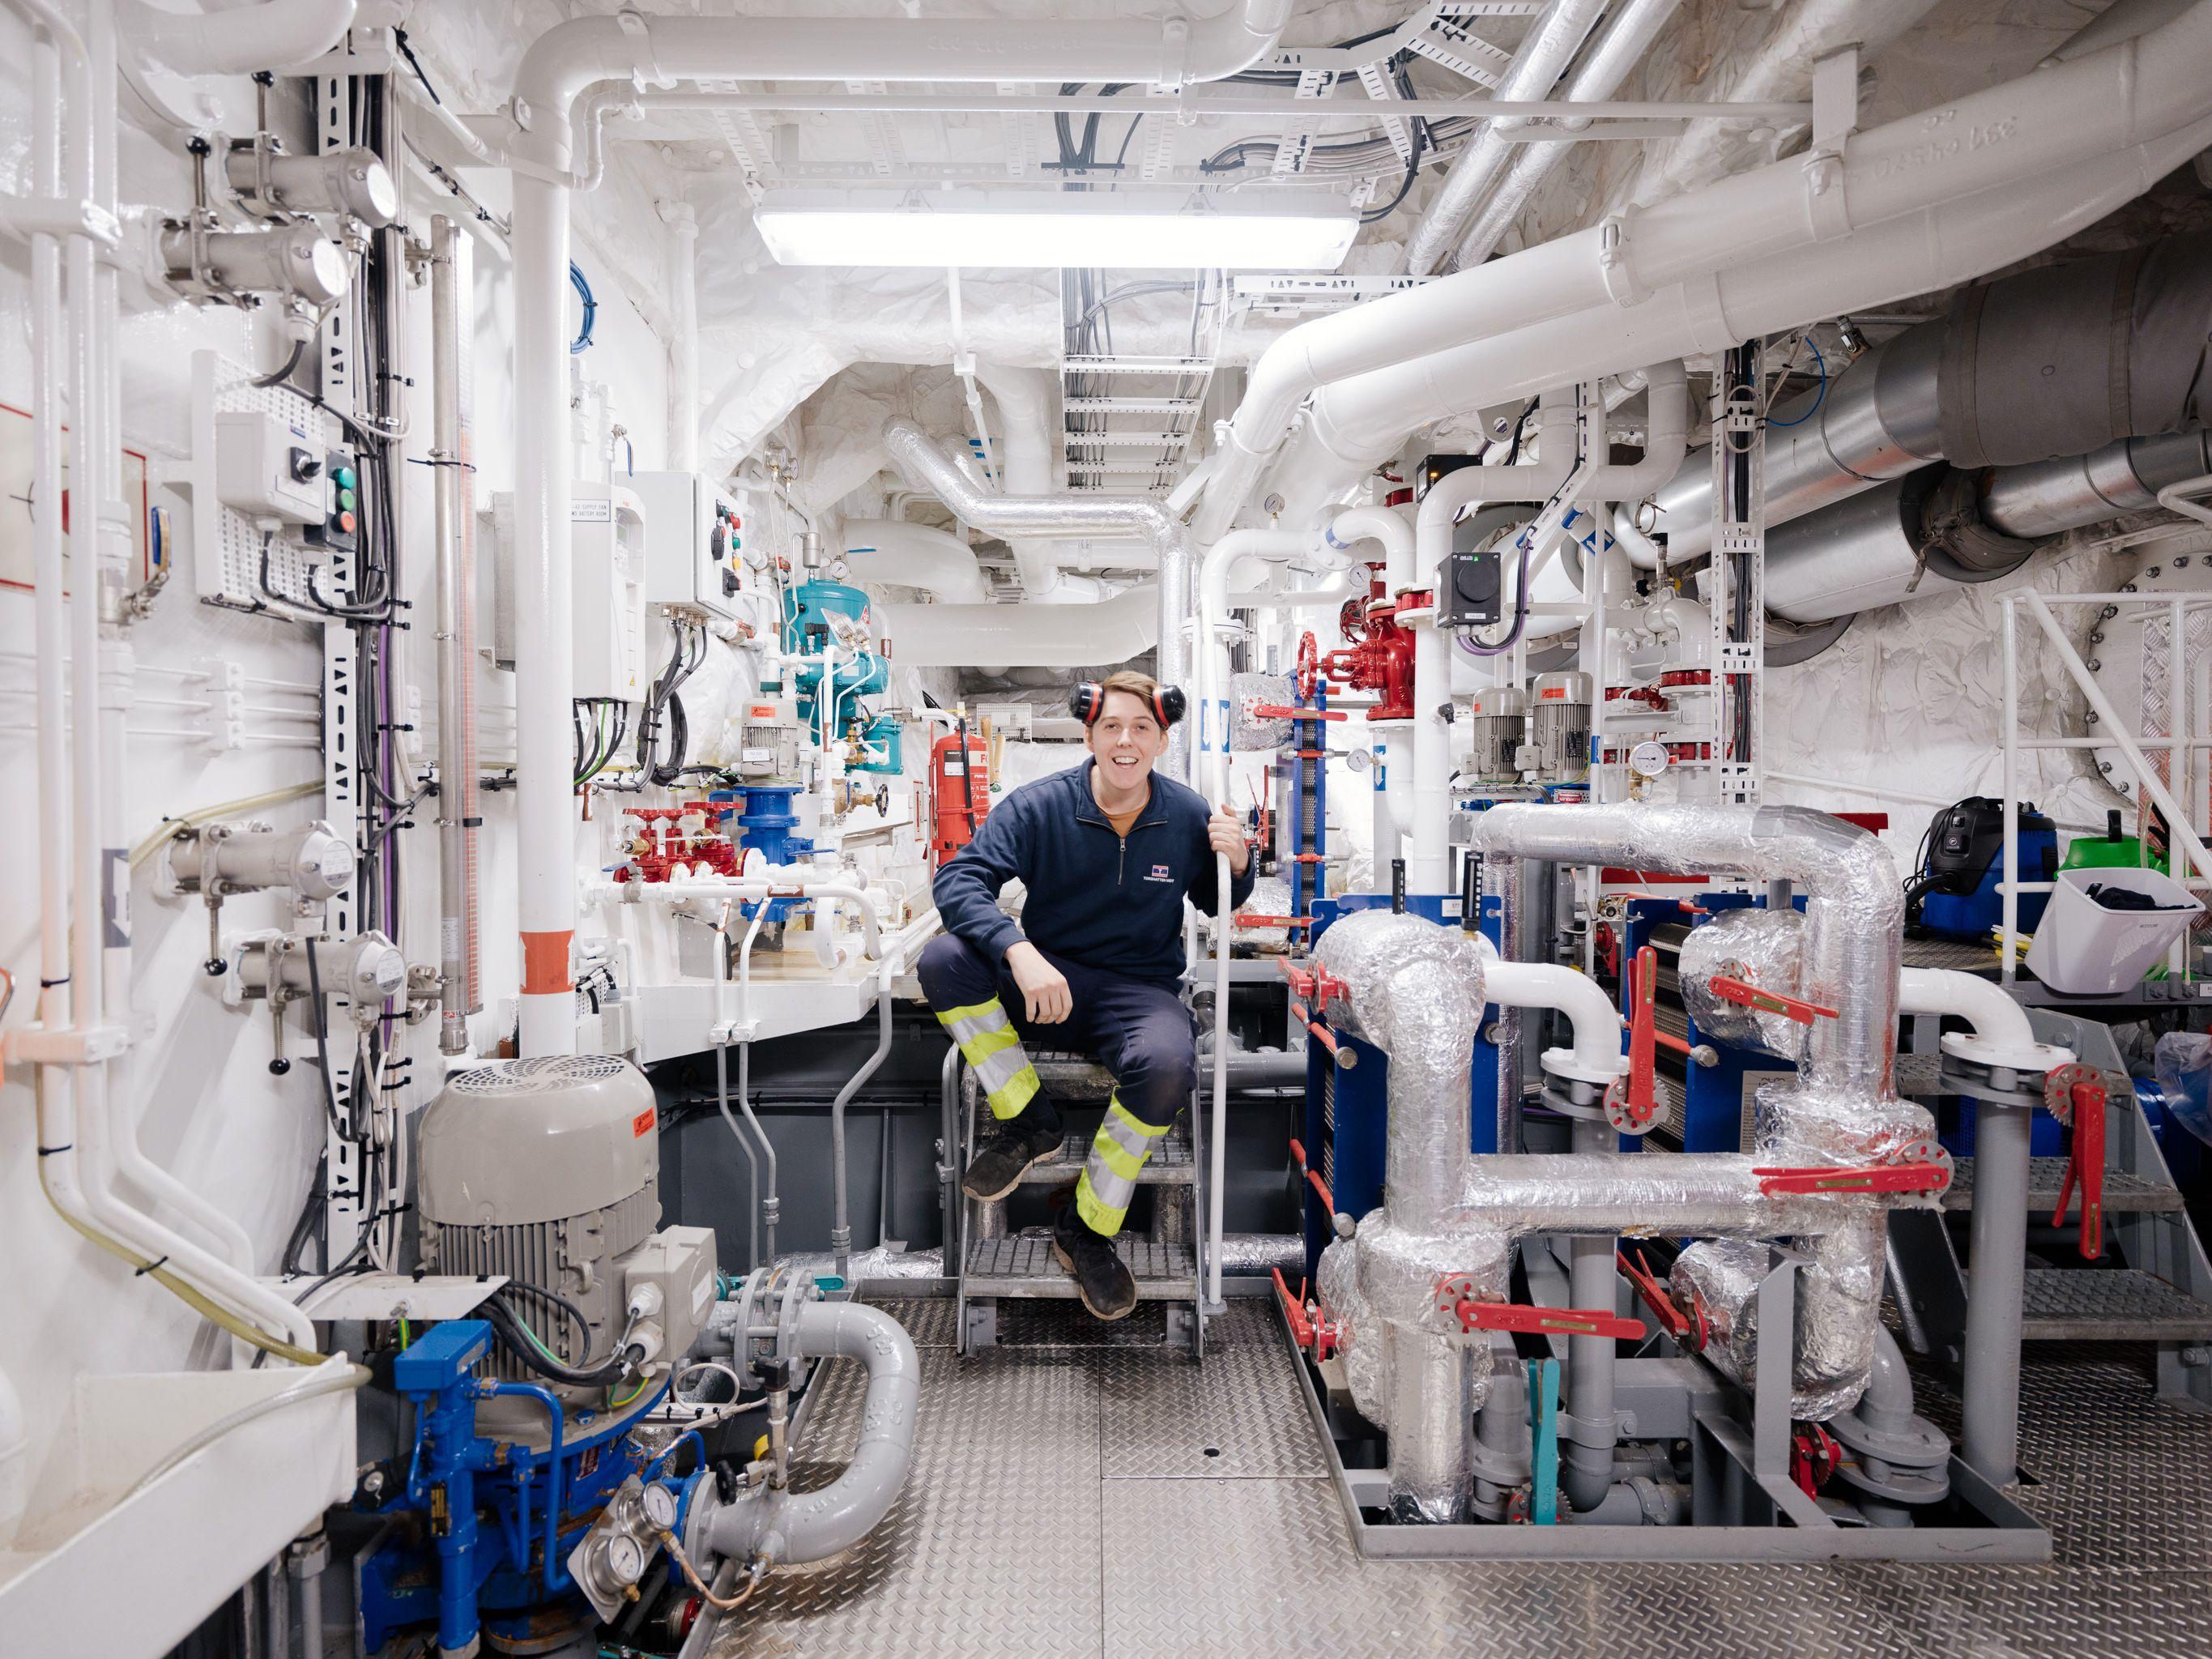 Photo of an employee working in the engine room of a ship